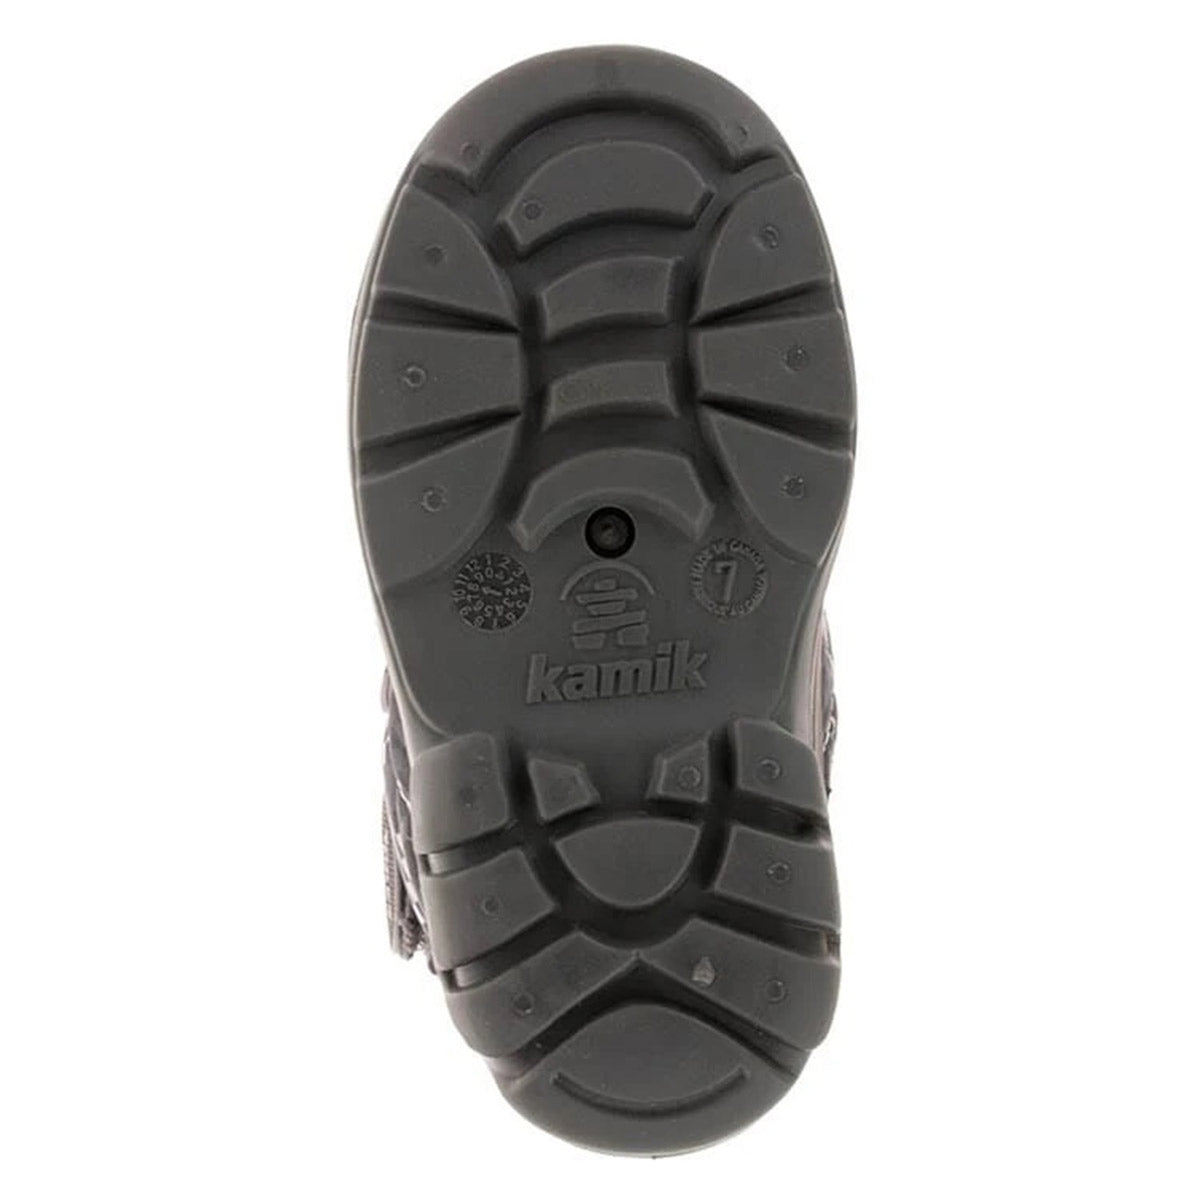 Sole of a Kamik SNOWBUG 4 toddler snow boot displaying treads and brand logo.